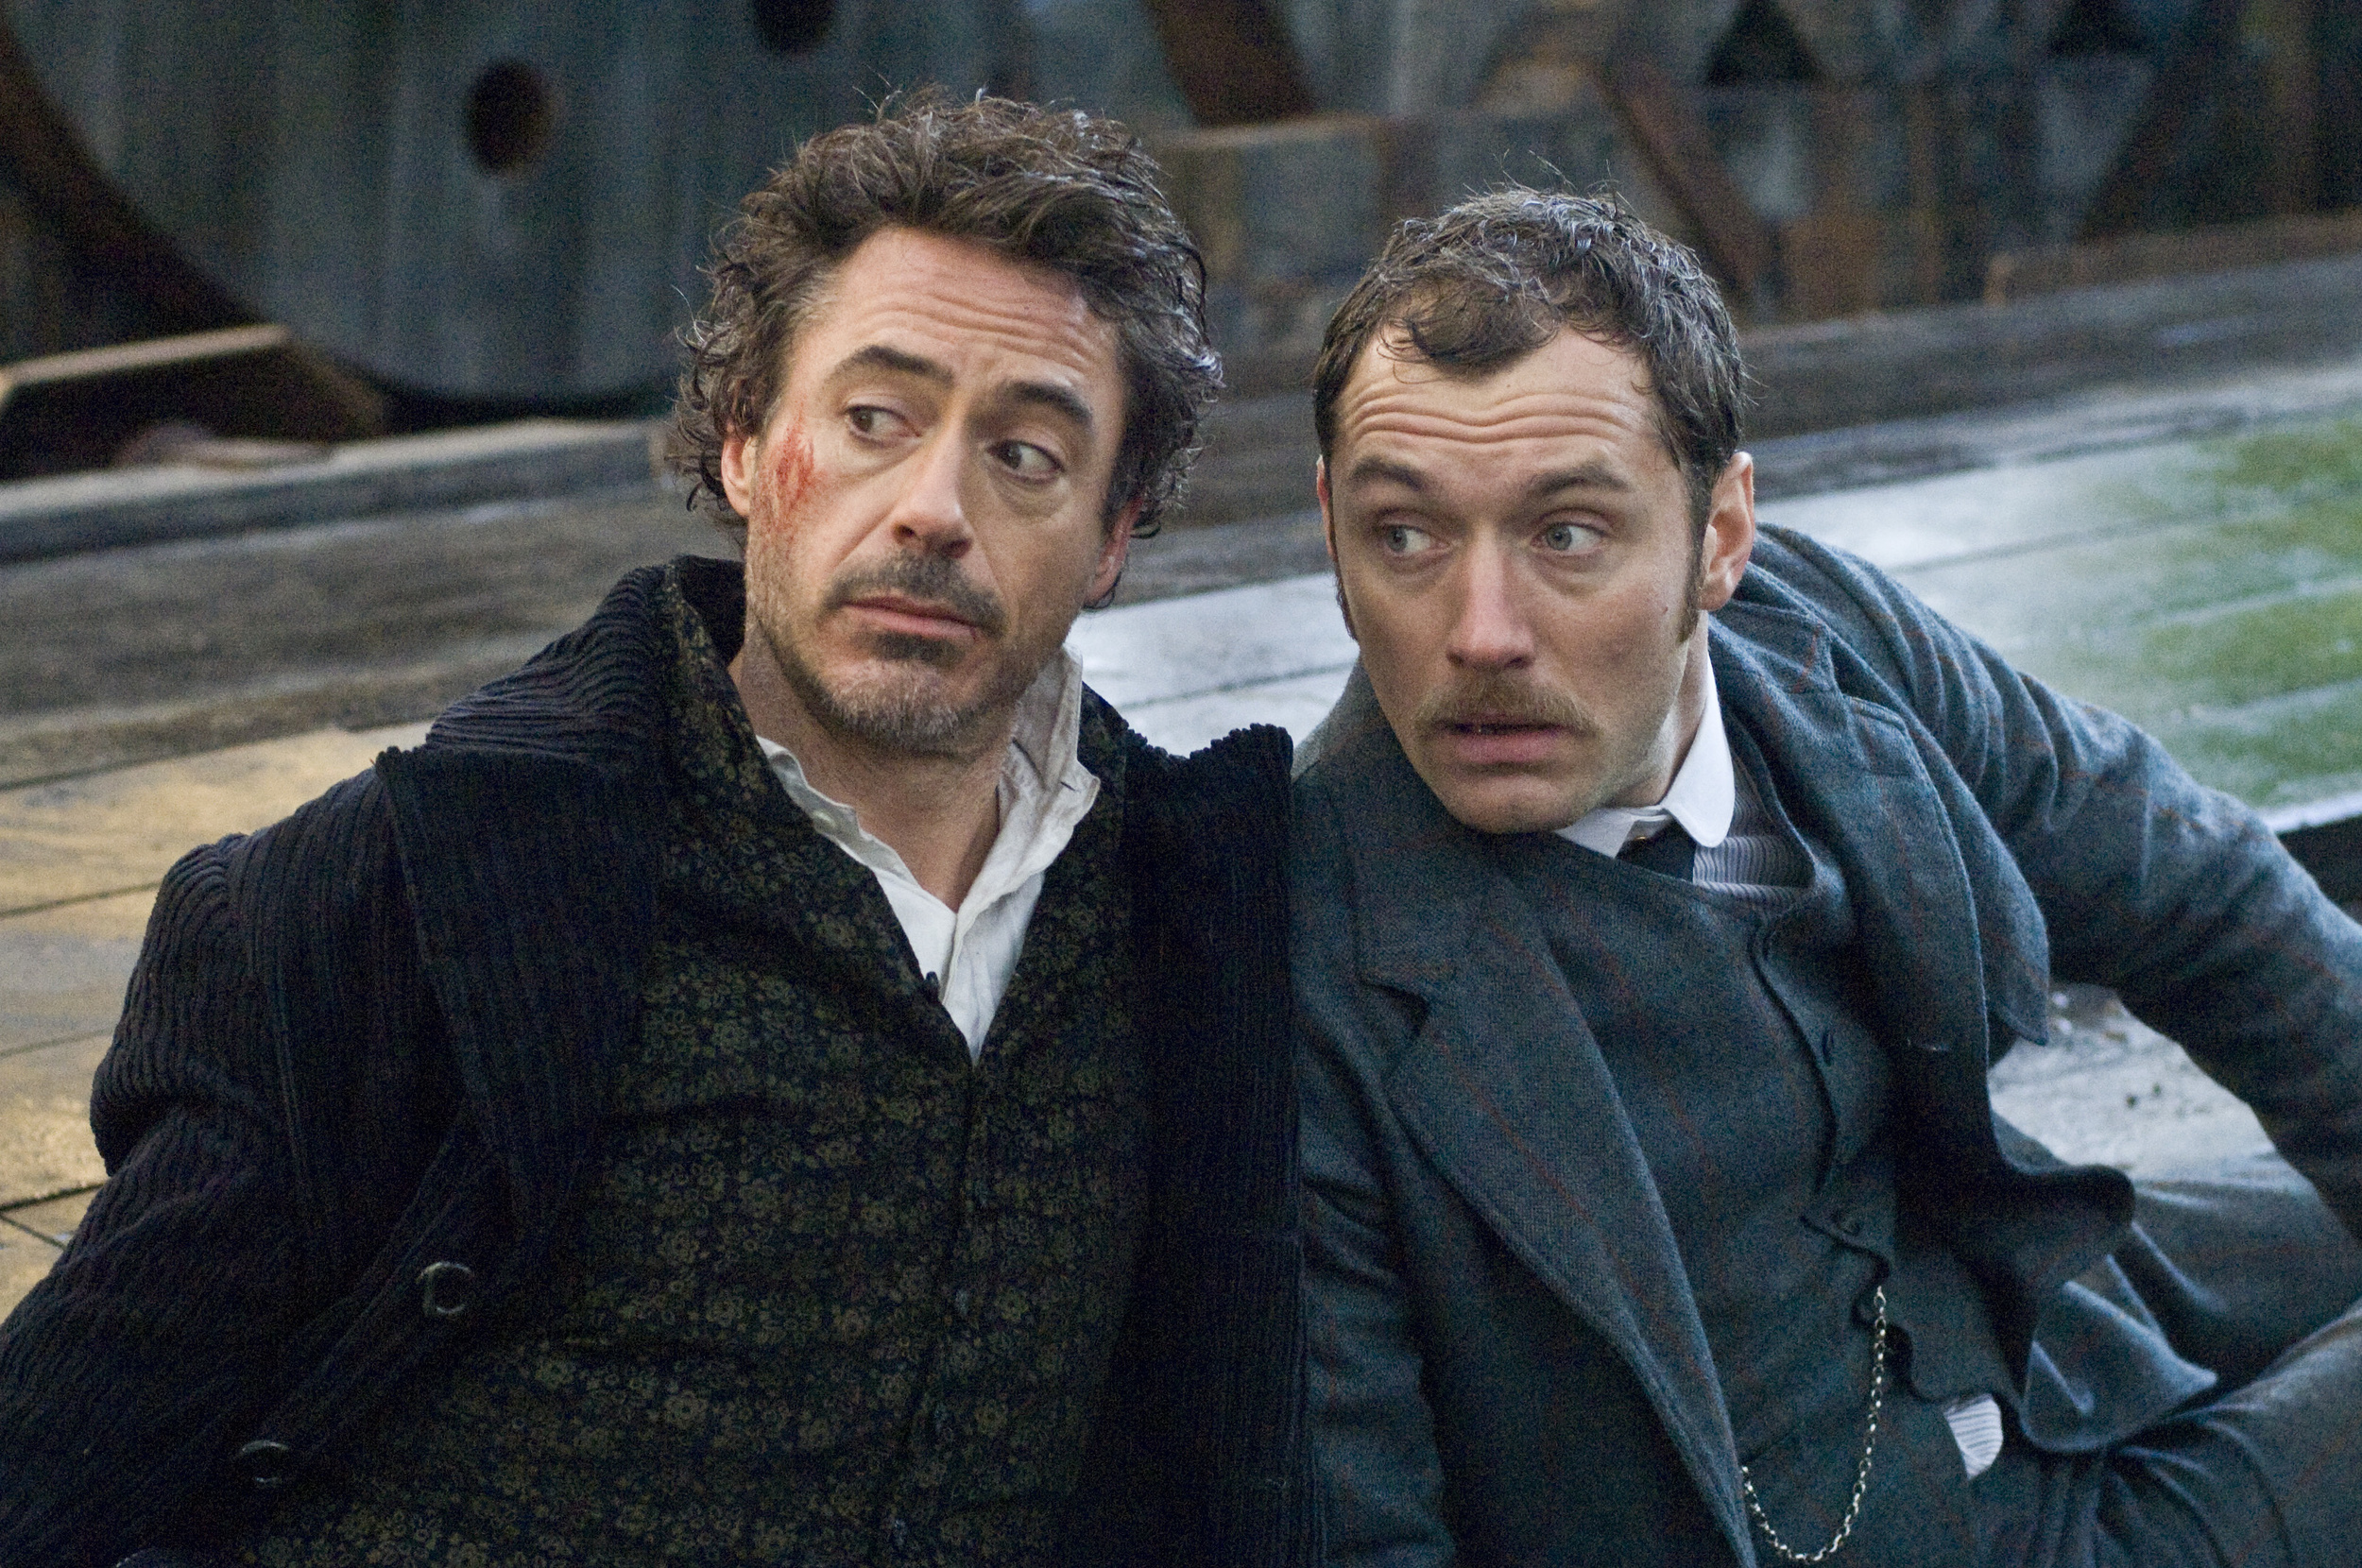 <p>Basically, every Sherlock Holmes movie is a London movie. The man famously lives on Baker Street. However, we can’t cover them all. There are literally dozens of Holmes films. One of our favorites is the first of the Robert Downey Jr. movies with him as the world’s greatest detective.</p><p>You may also like: <a href='https://www.yardbarker.com/entertainment/articles/celebrities_with_the_most_difficult_names_to_pronounce/s1__28843502'>Celebrities with the most difficult names to pronounce</a></p>